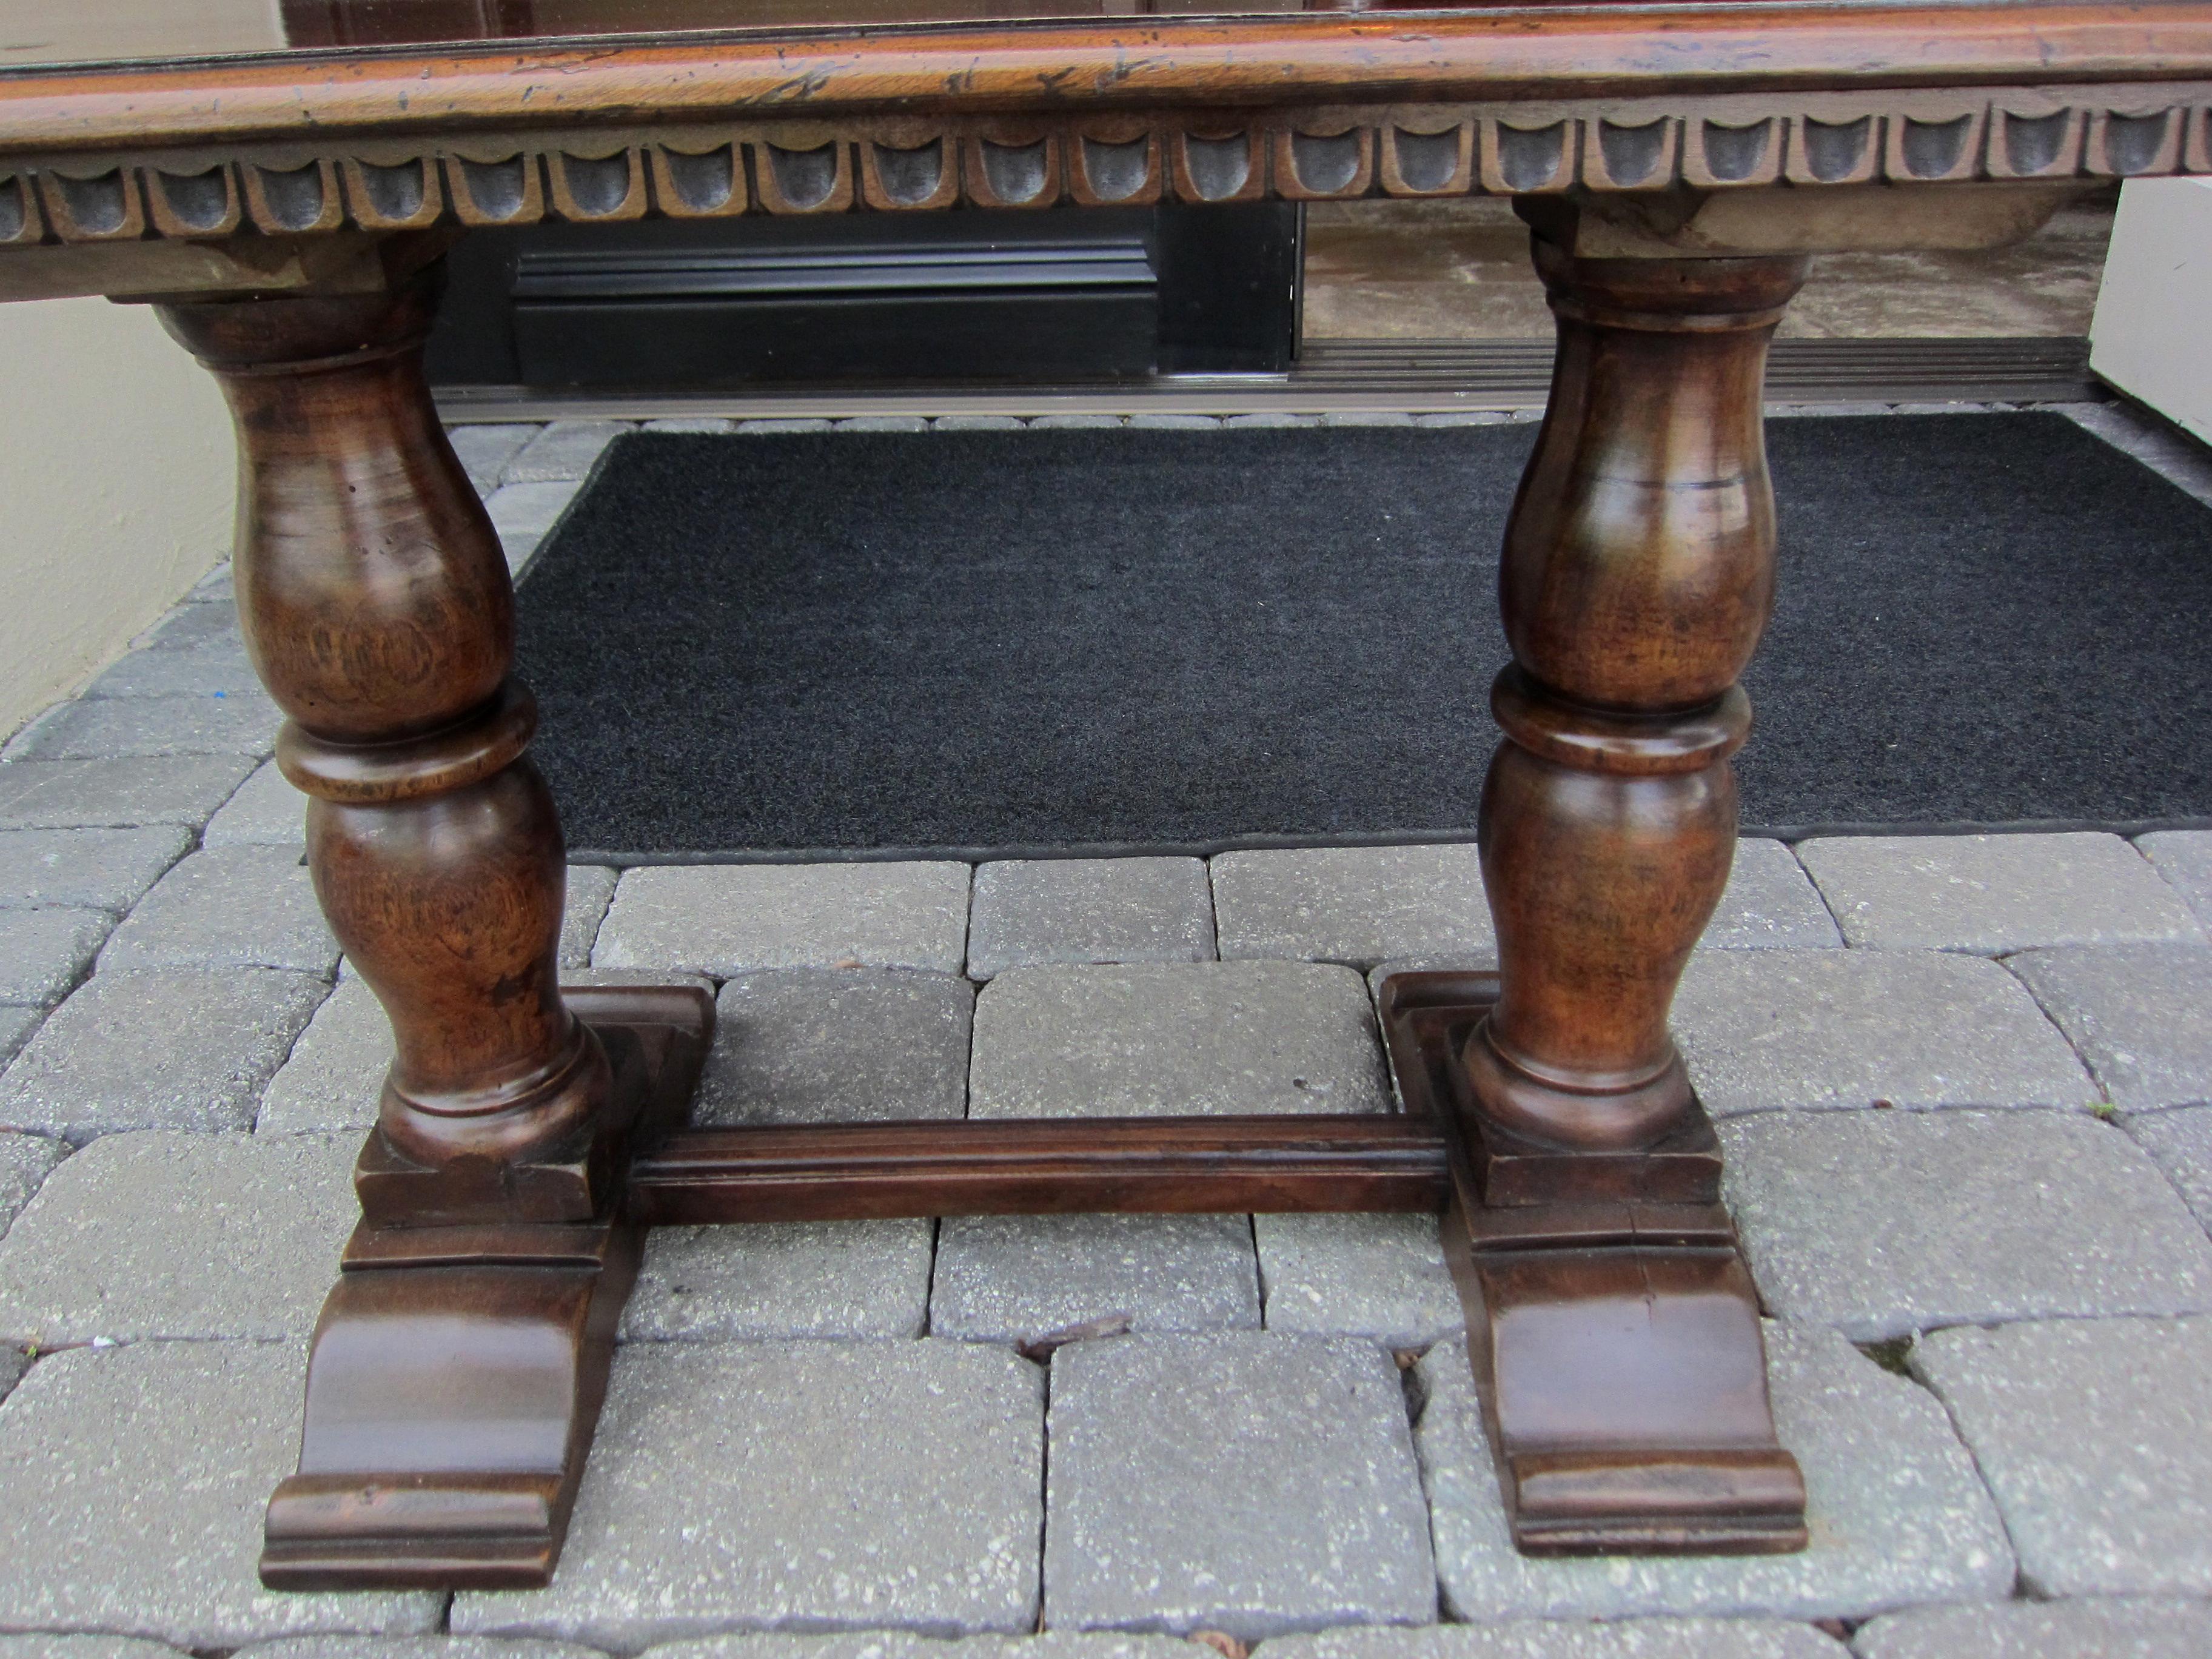 19th-20th century Italian style trestle drinks table composed of early elements.